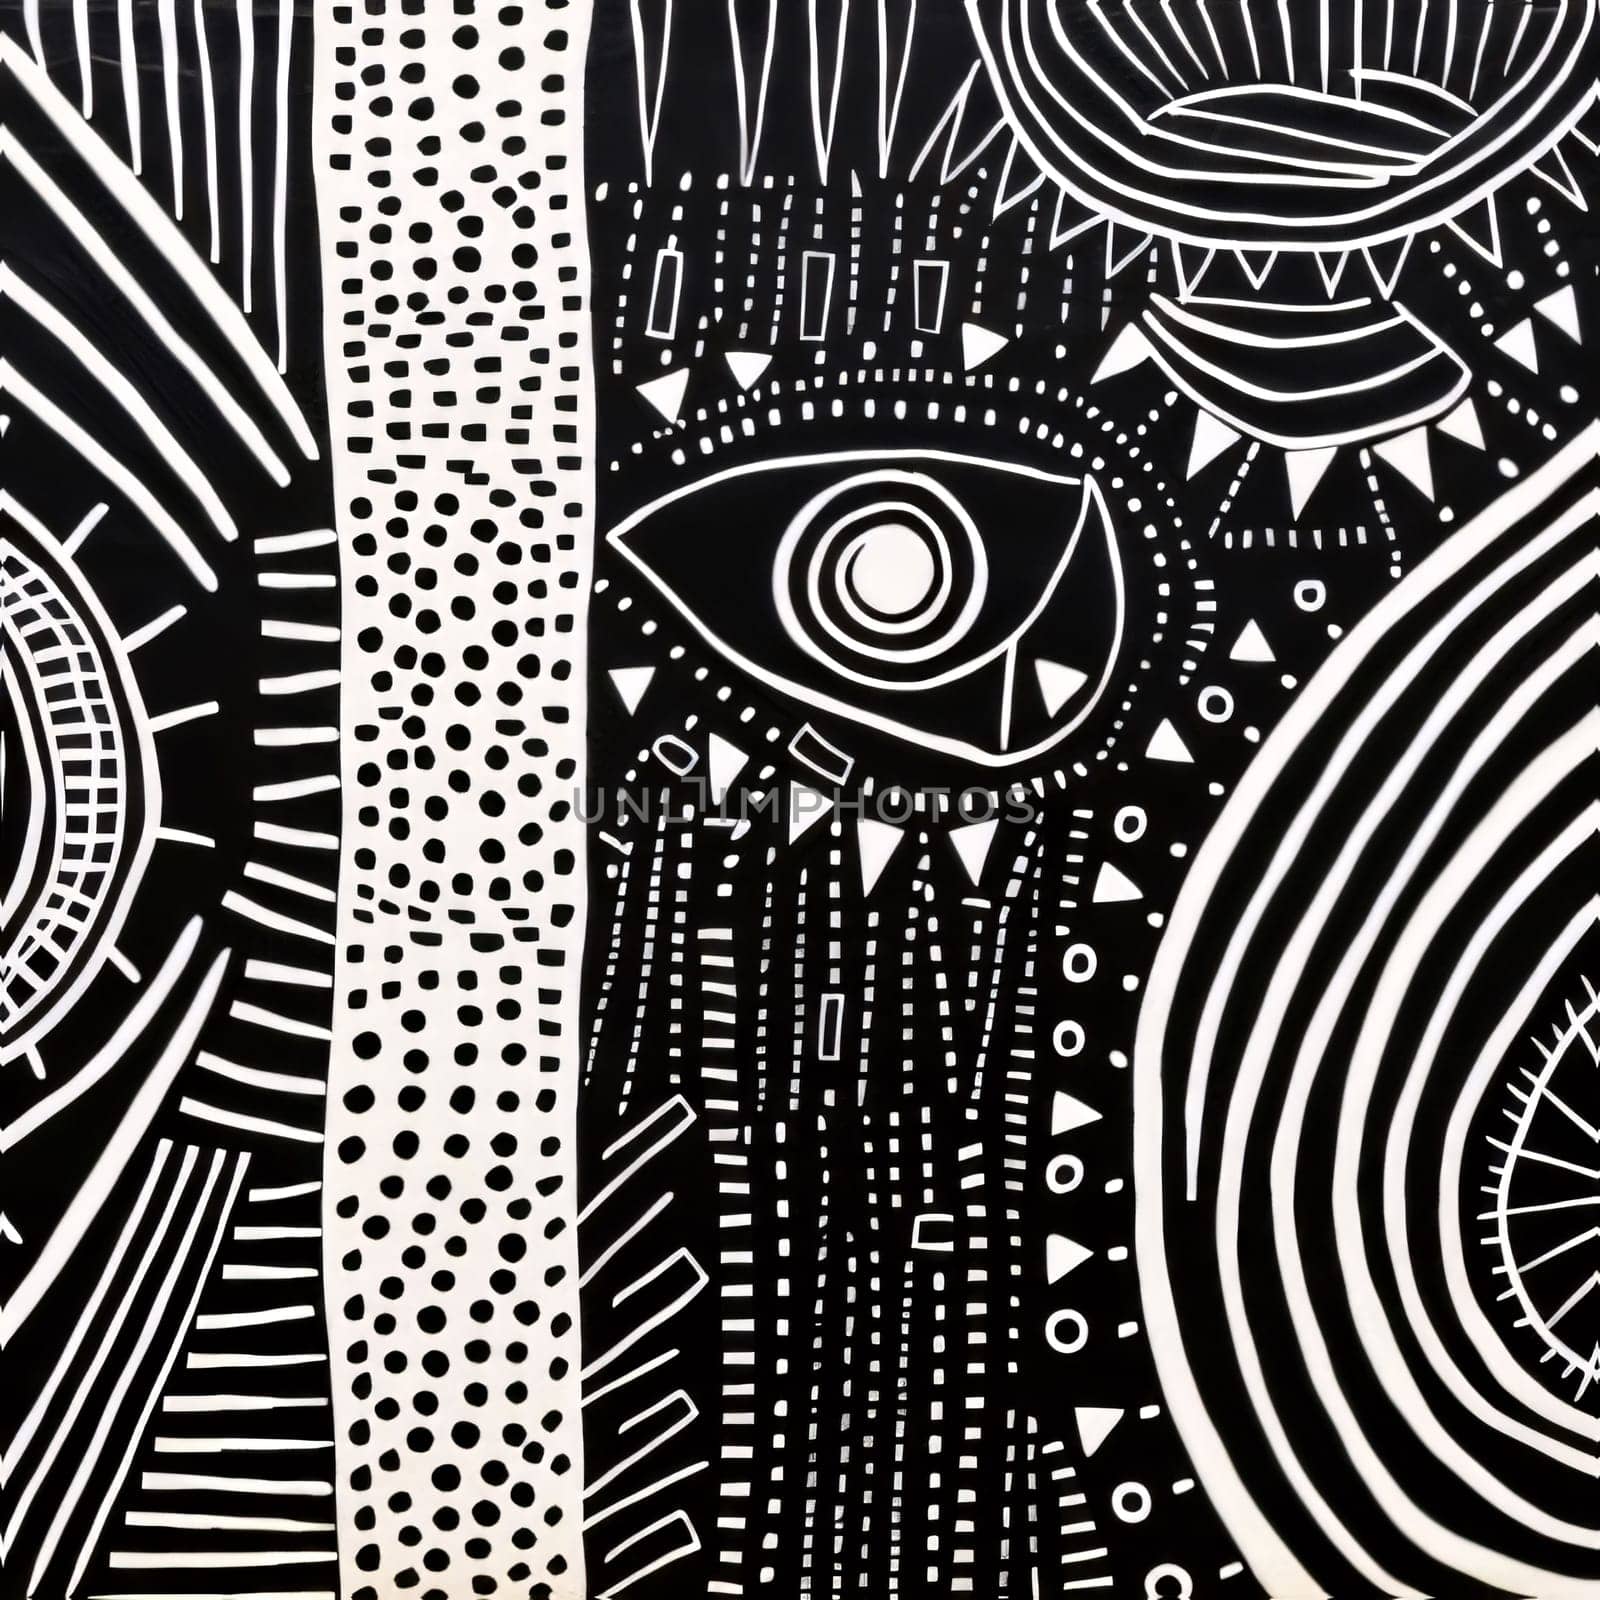 Abstract background design: Zentangle hand drawn black and white abstract background. Vector illustration.